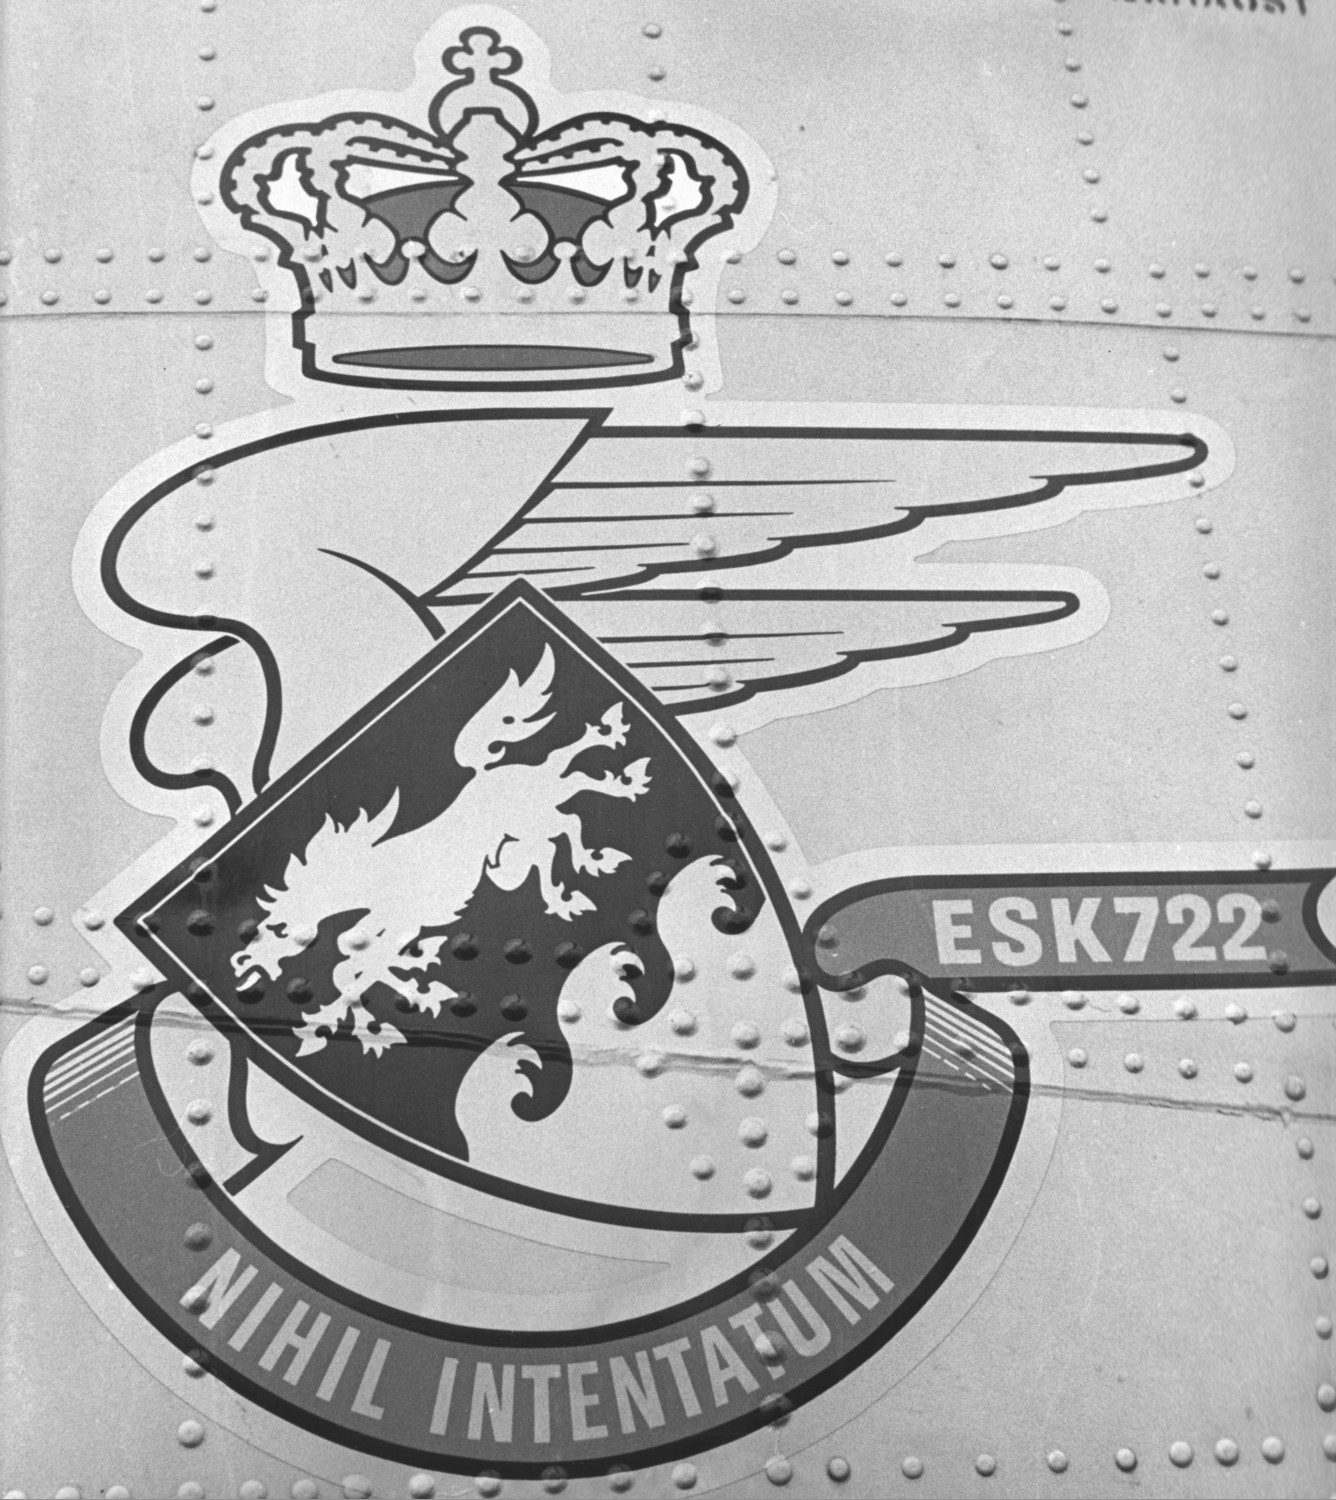 eskadrille 722 squadron royal danish air force crest insignia patch badge sea king s-61a